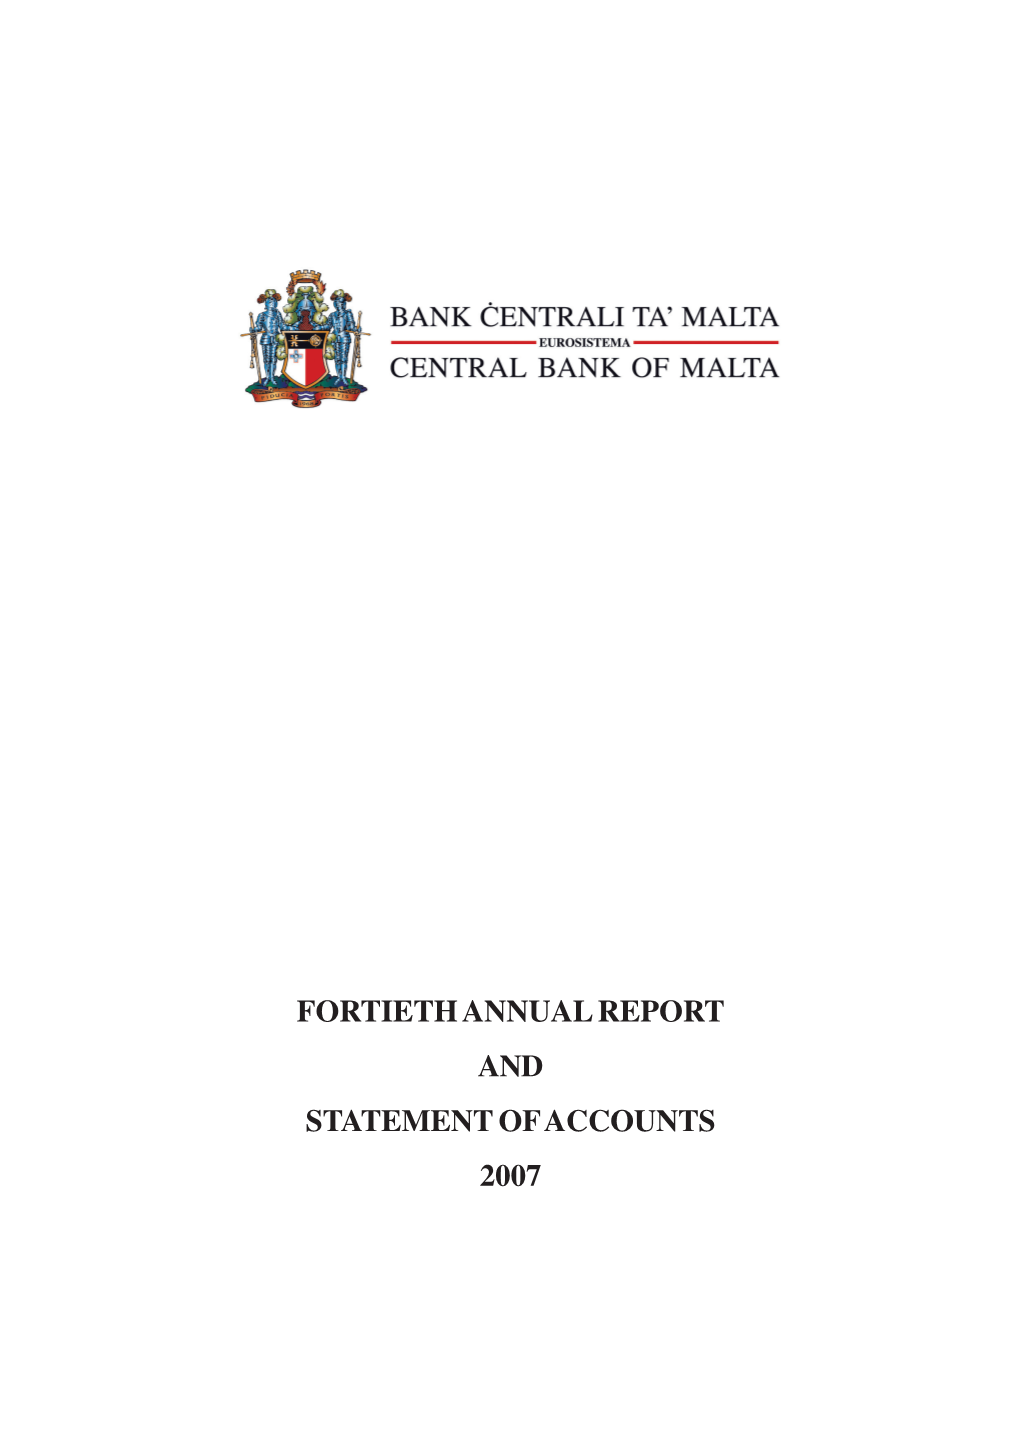 FORTIETH ANNUAL REPORT and STATEMENT of ACCOUNTS 2007 © Central Bank of Malta, 2008